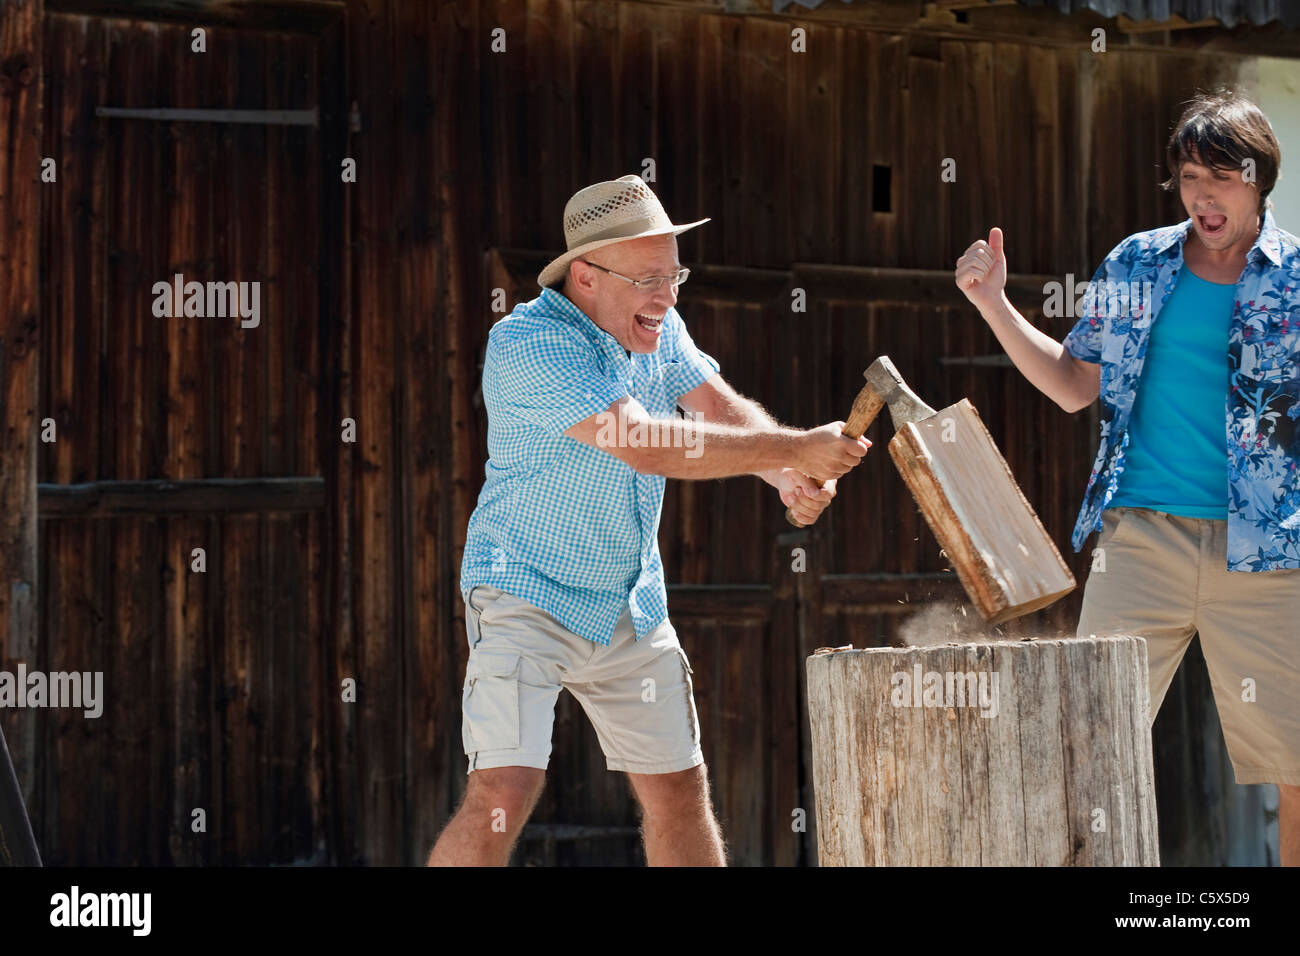 Germany, Bavaria, Senior man chopping wood, man in background cheering Banque D'Images